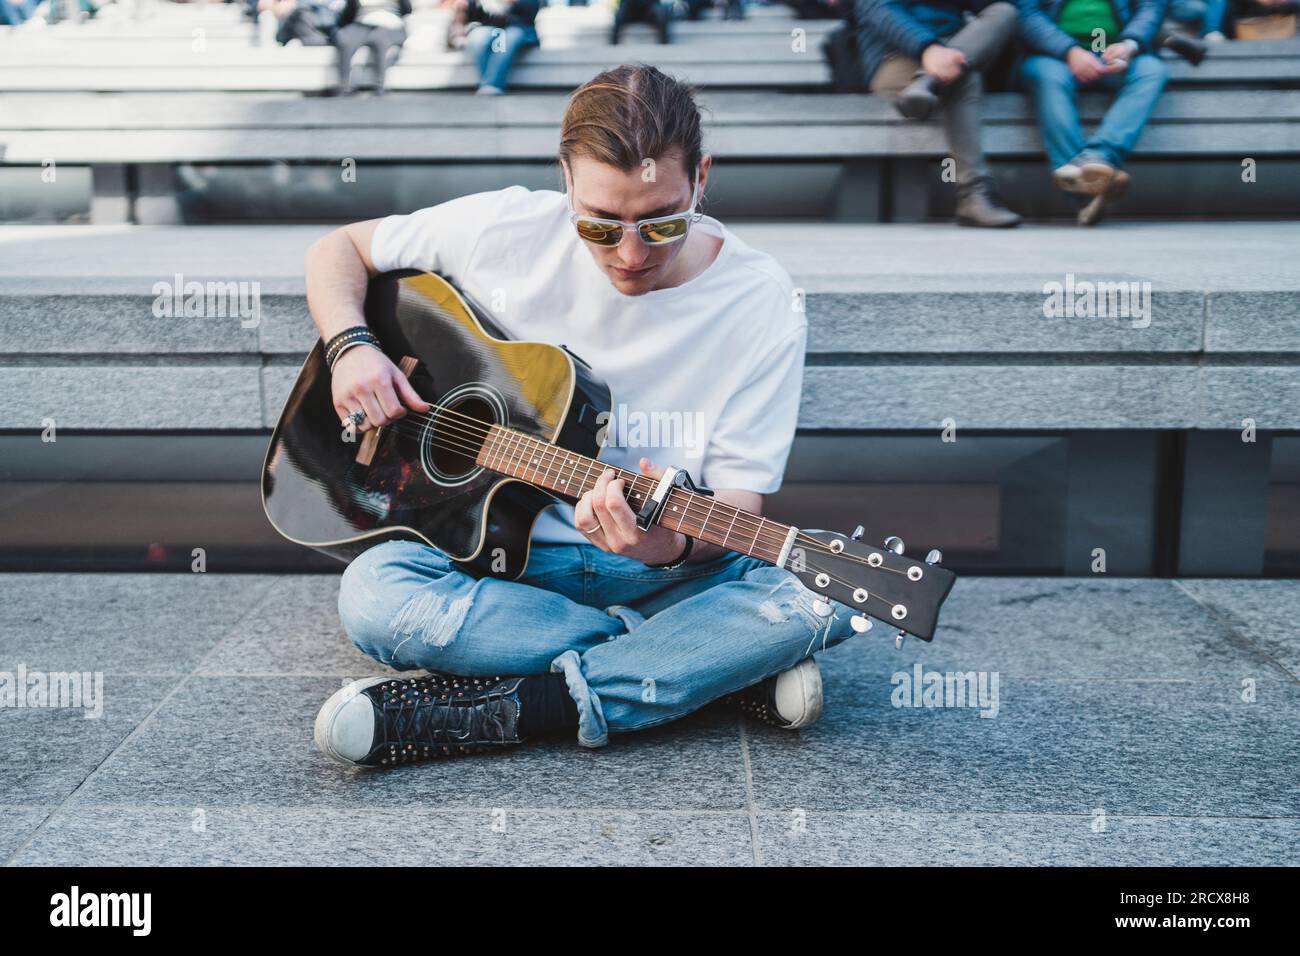 musician looking at the guitar sitting on the floor with people behind Stock Photo